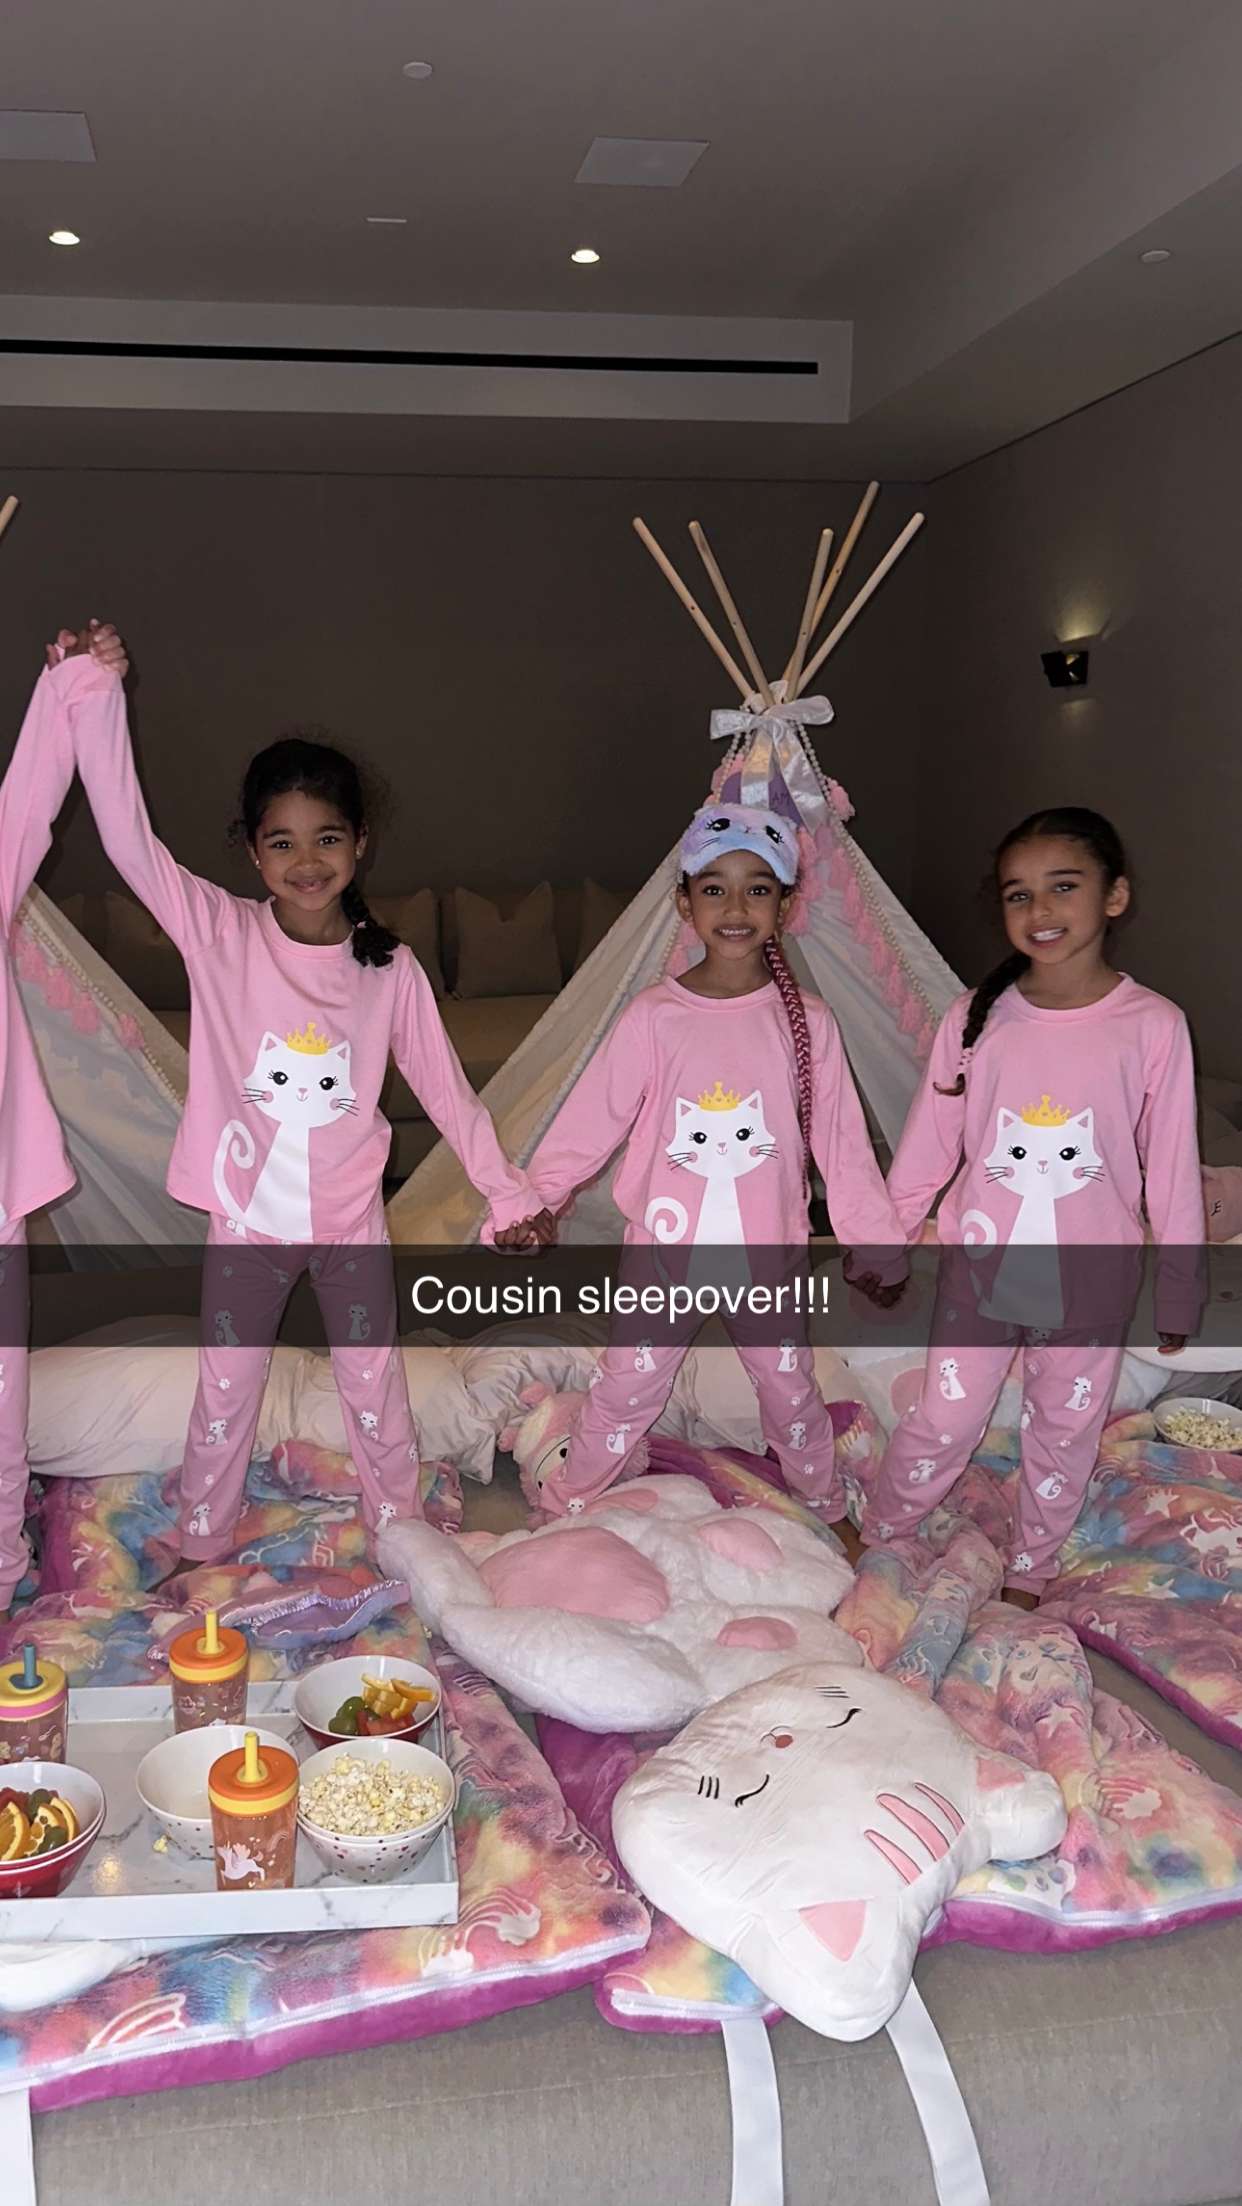 Khloe threw a sleepover for several of the Kardashian kids at her $17M mansion